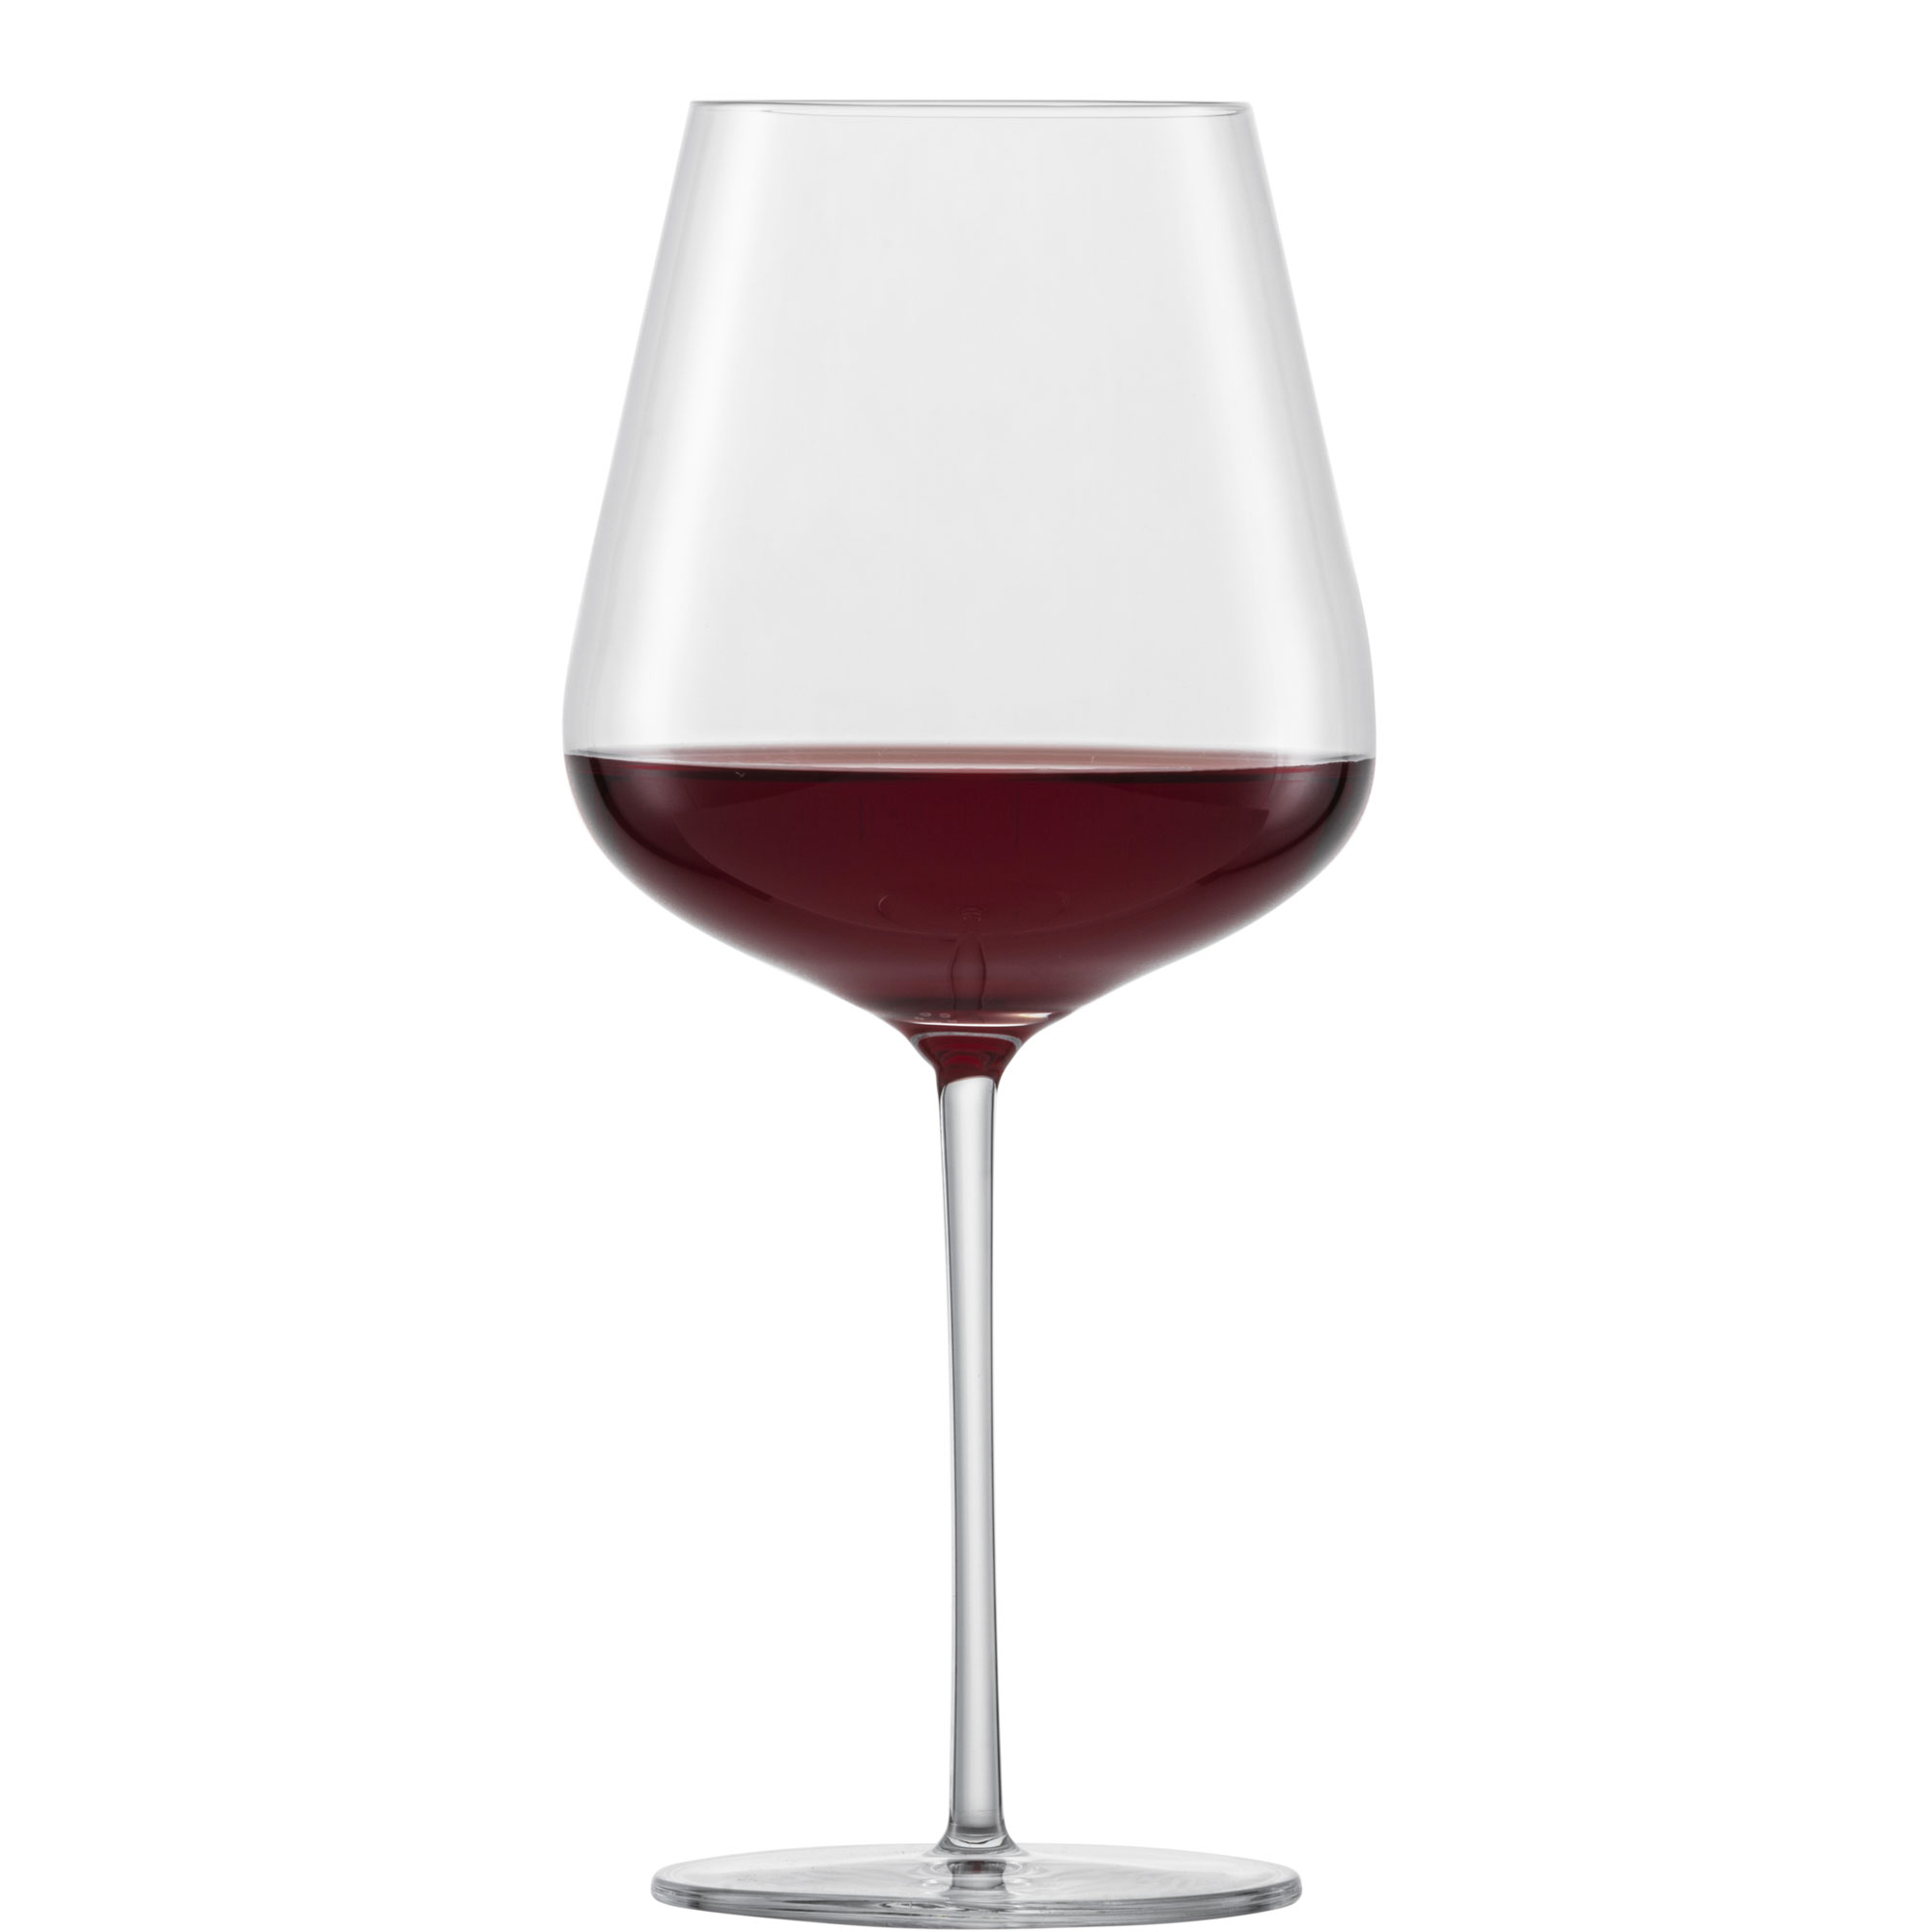 All-round red wine glass Verbelle, Zwiesel Glas - 685ml (1 pc.)